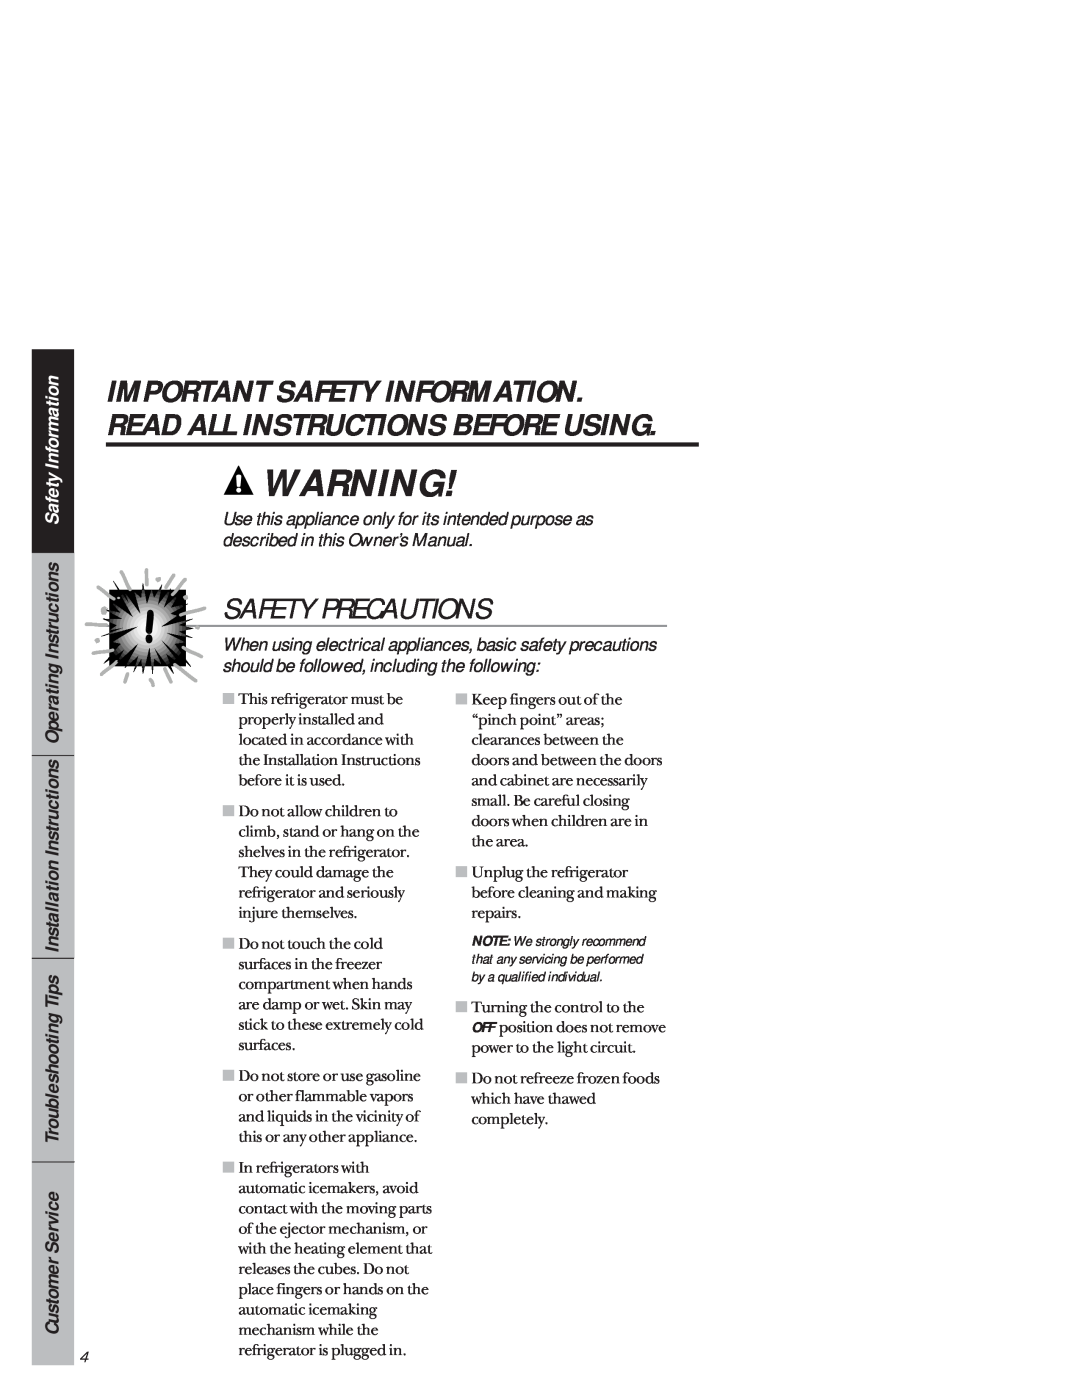 GE 1825 owner manual Safety Precautions, Safety Information, Instructions 